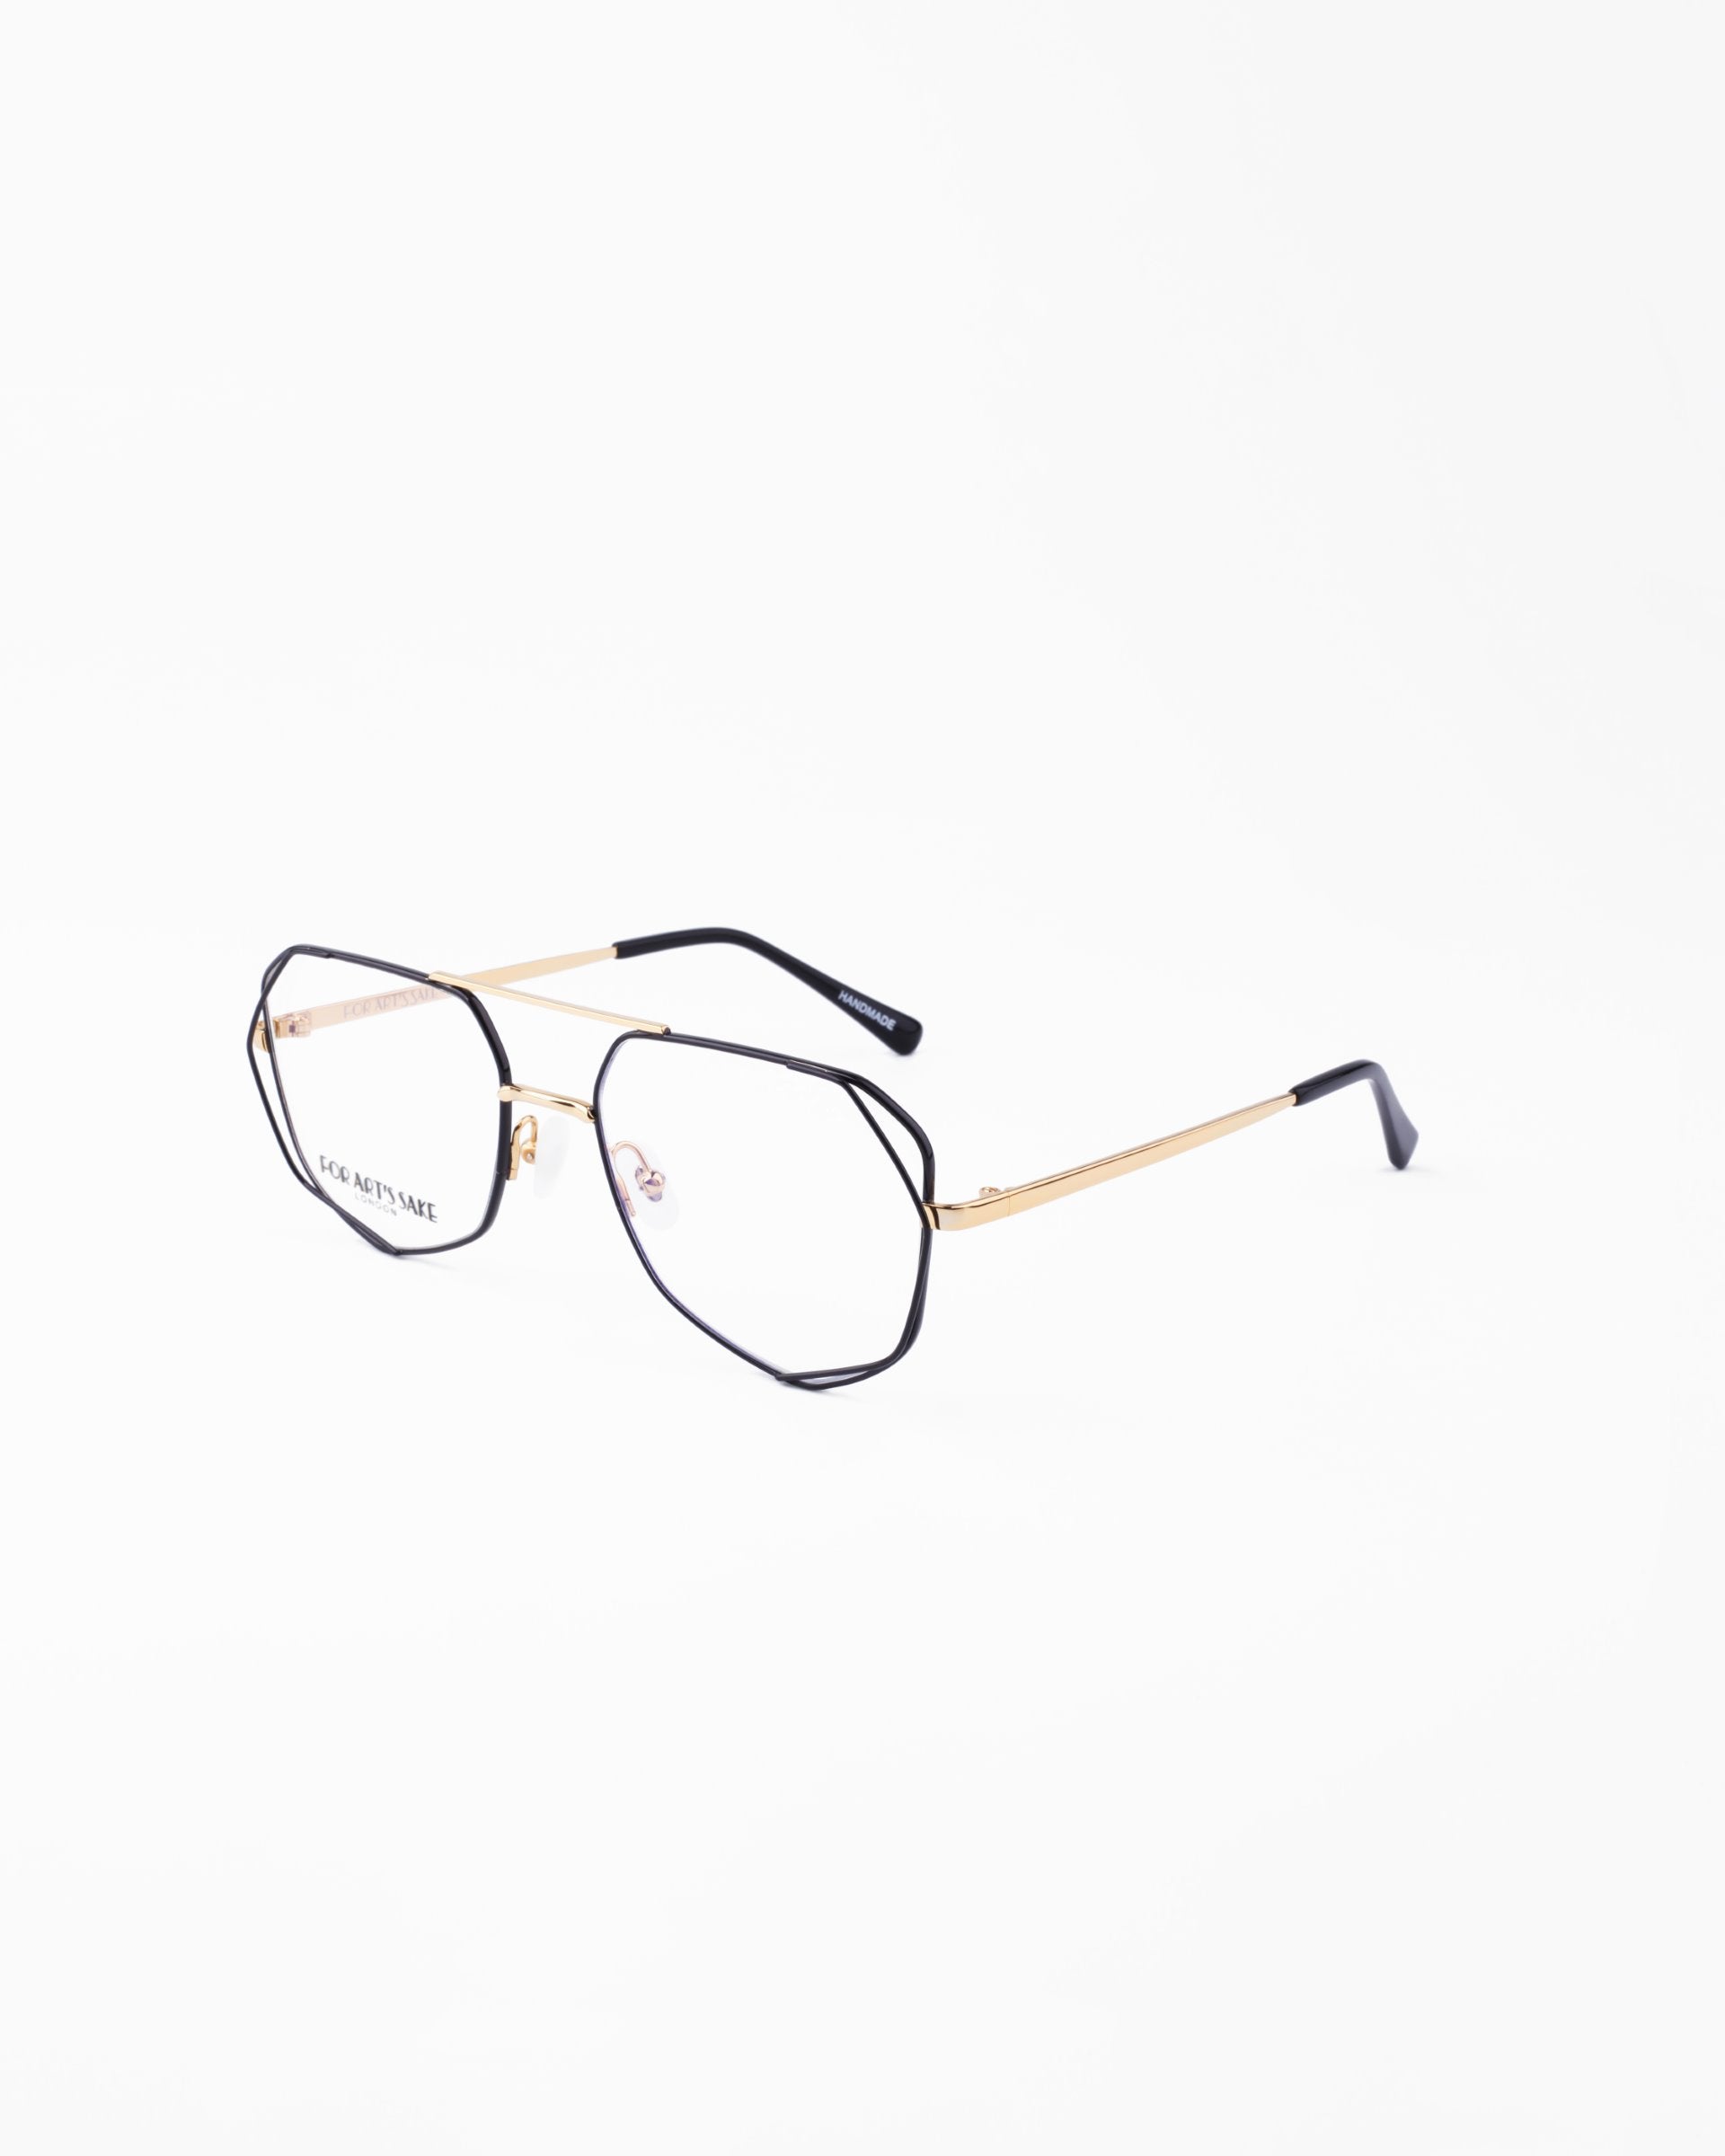 A pair of stylish Genius Two eyeglasses by For Art&#39;s Sake® with thin gold metal frames and black temple tips against a plain white background. The hexagonal lenses, equipped with a blue light filter, offer a modern and chic look while providing essential eye protection.